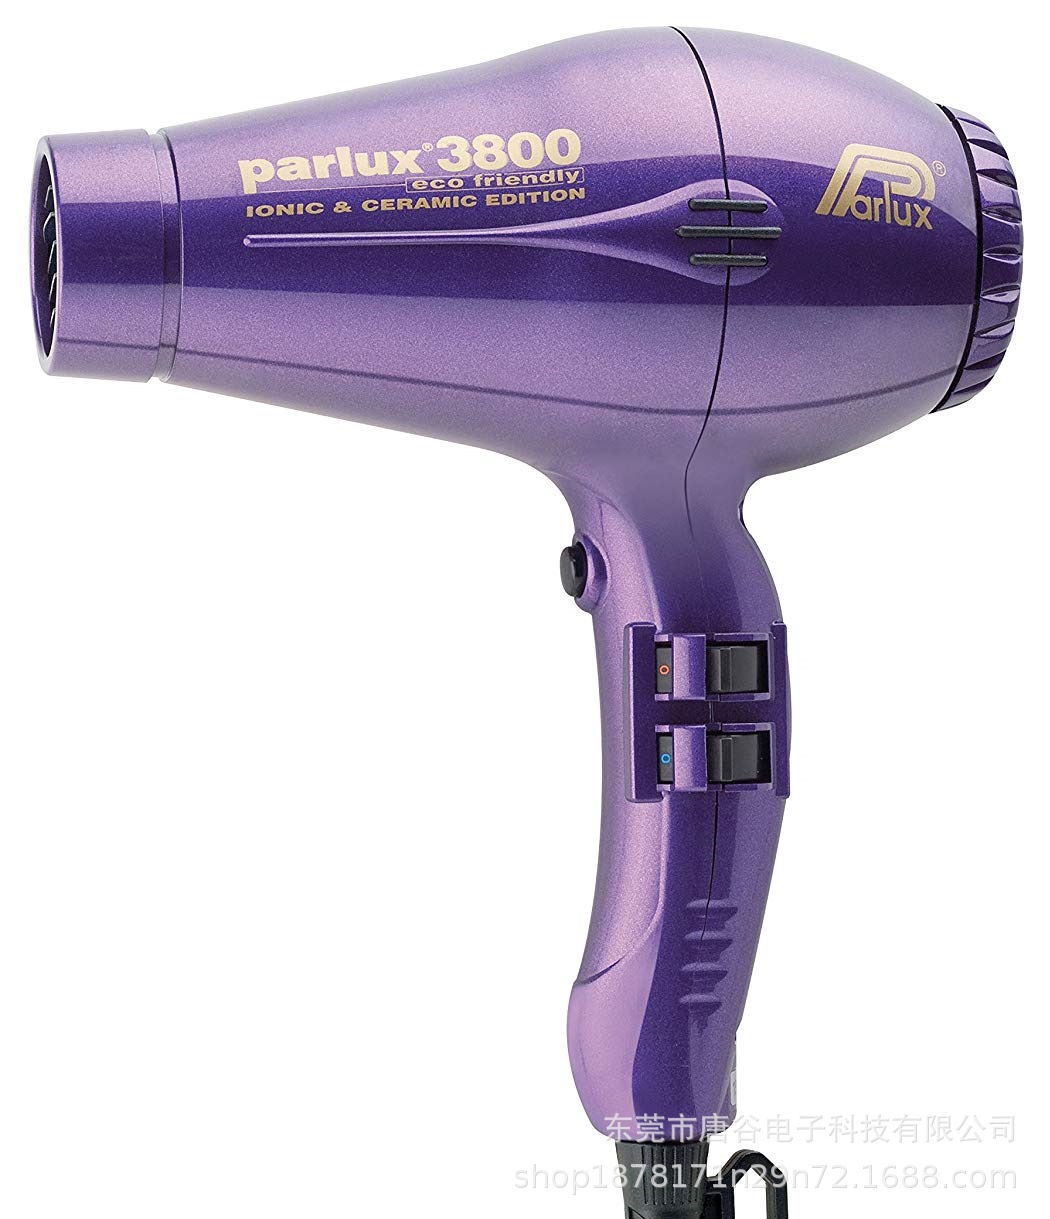 Amazon Parlux3800 Hair Dryer Does Not Hu...